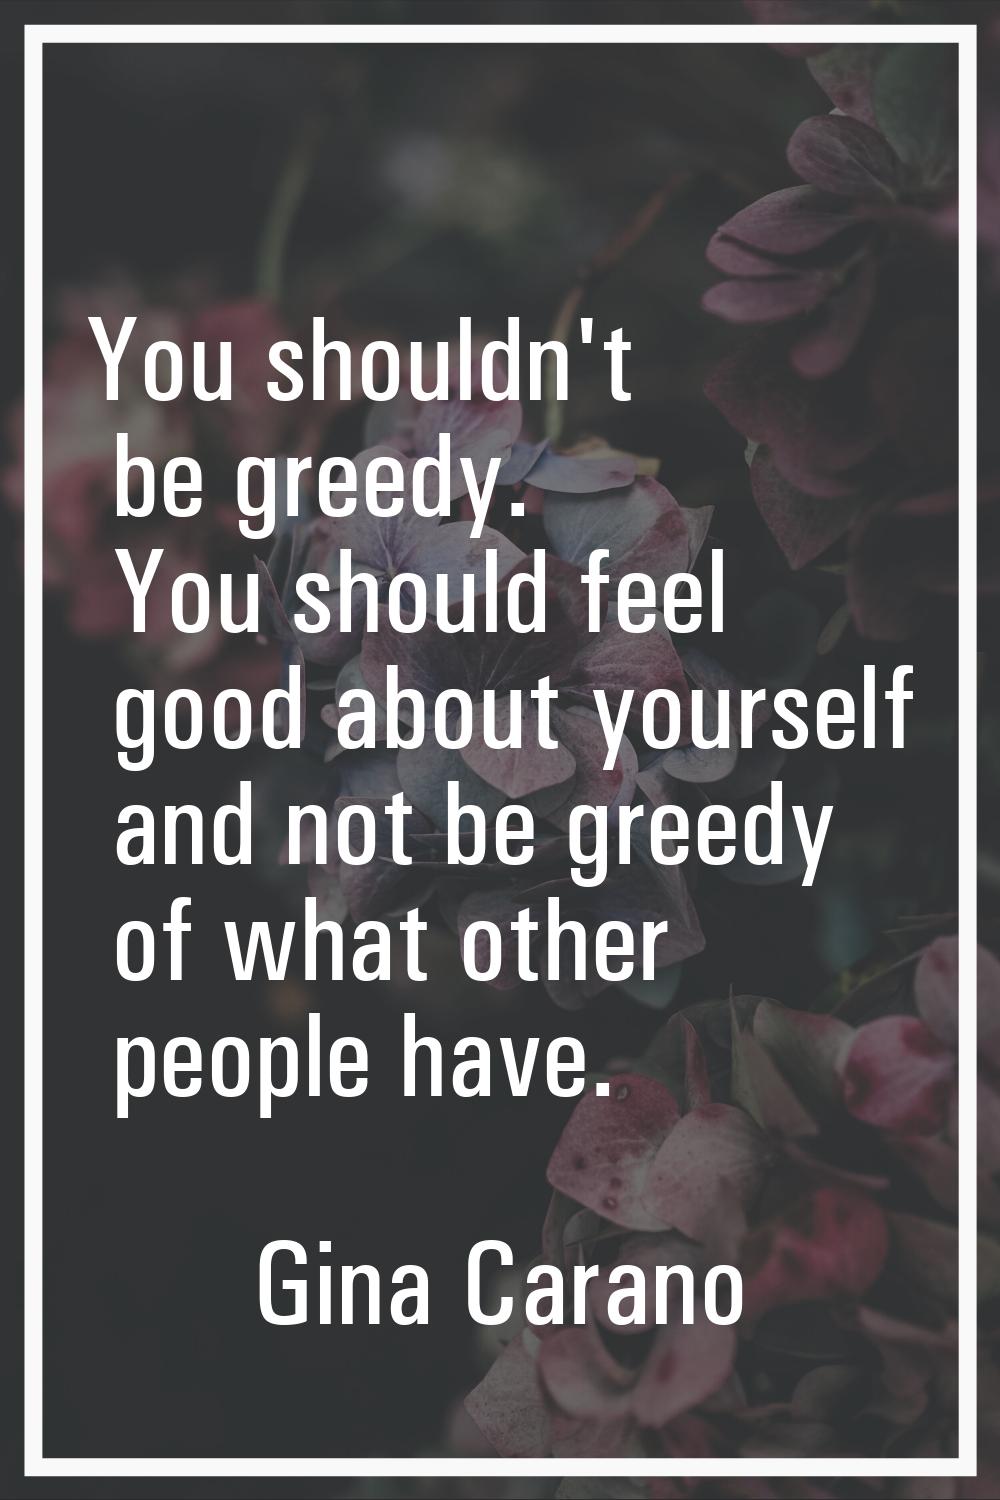 You shouldn't be greedy. You should feel good about yourself and not be greedy of what other people